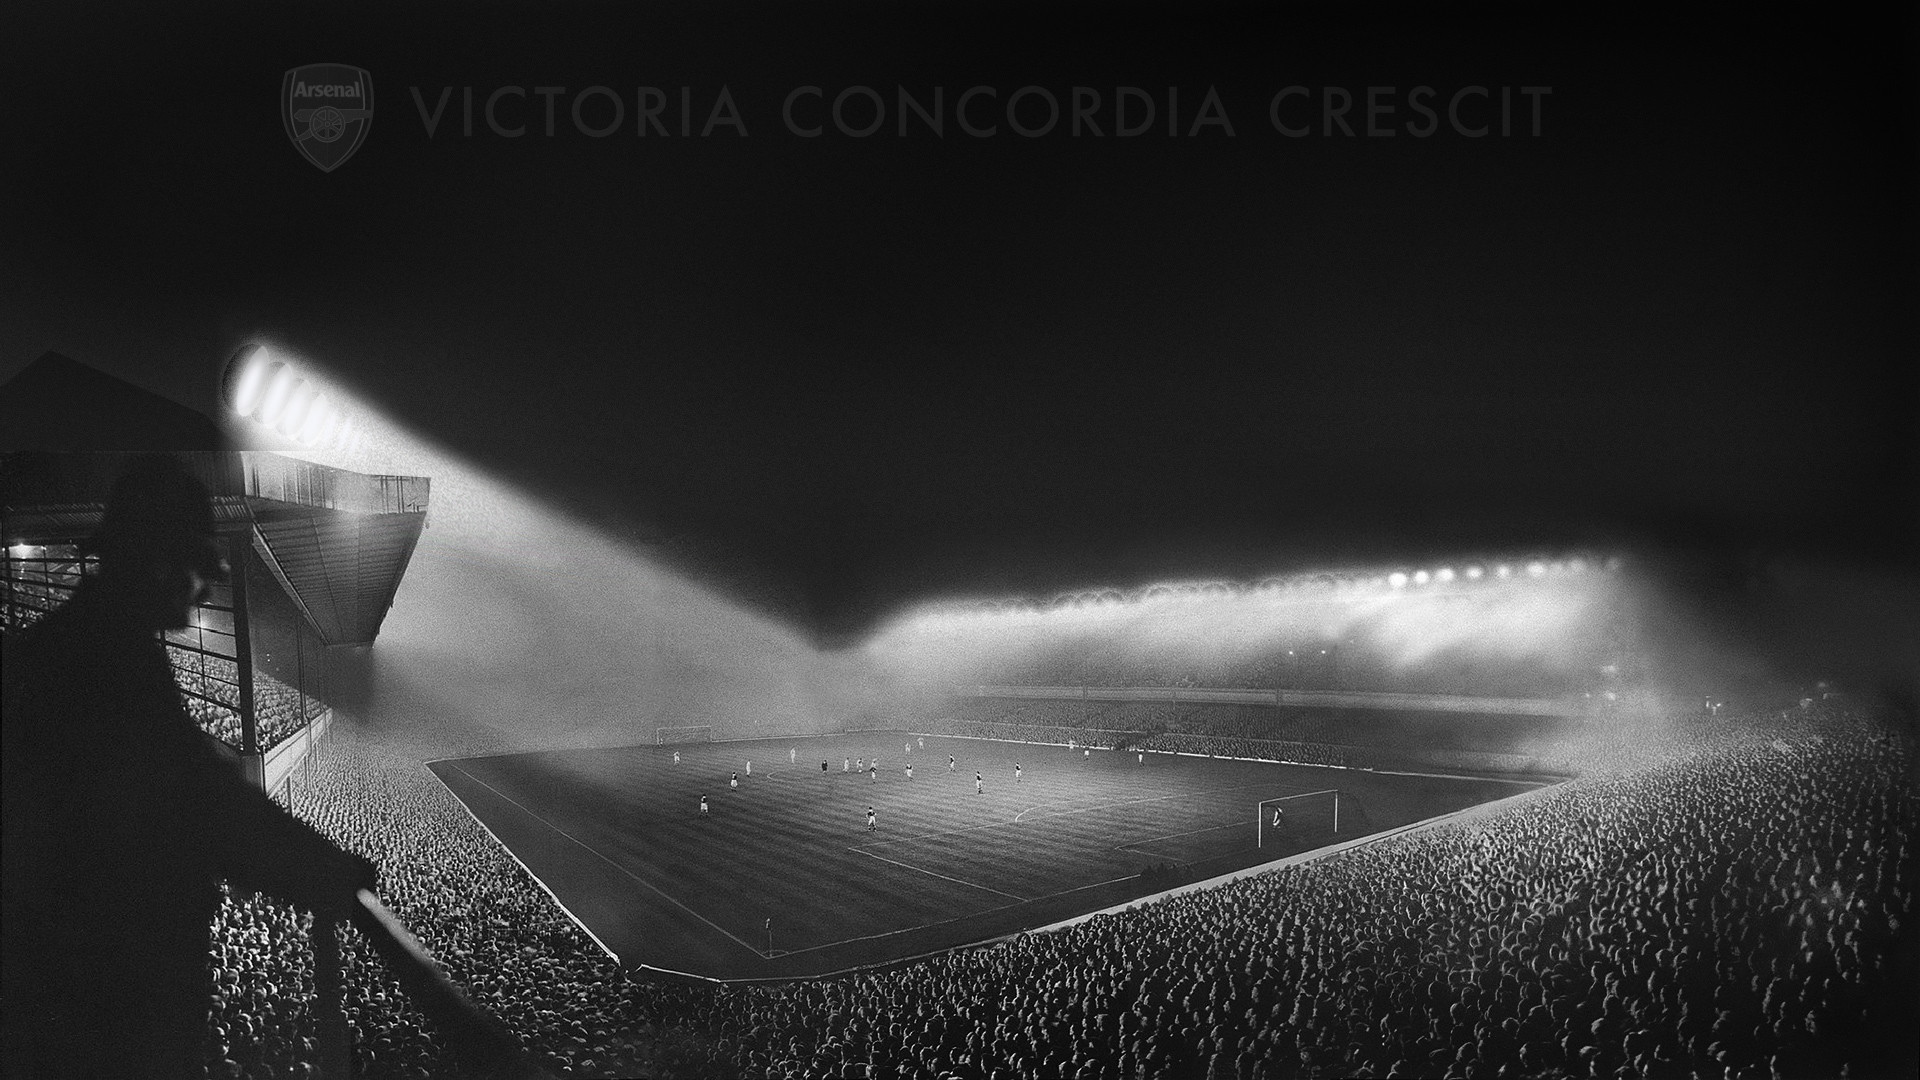 Arsenal F.C.'s Highbury Stadium In London During A Match Where Floodlights Were Used For The 2nd Time Ever, C. 1952. (x Post From R HistoryPorn)